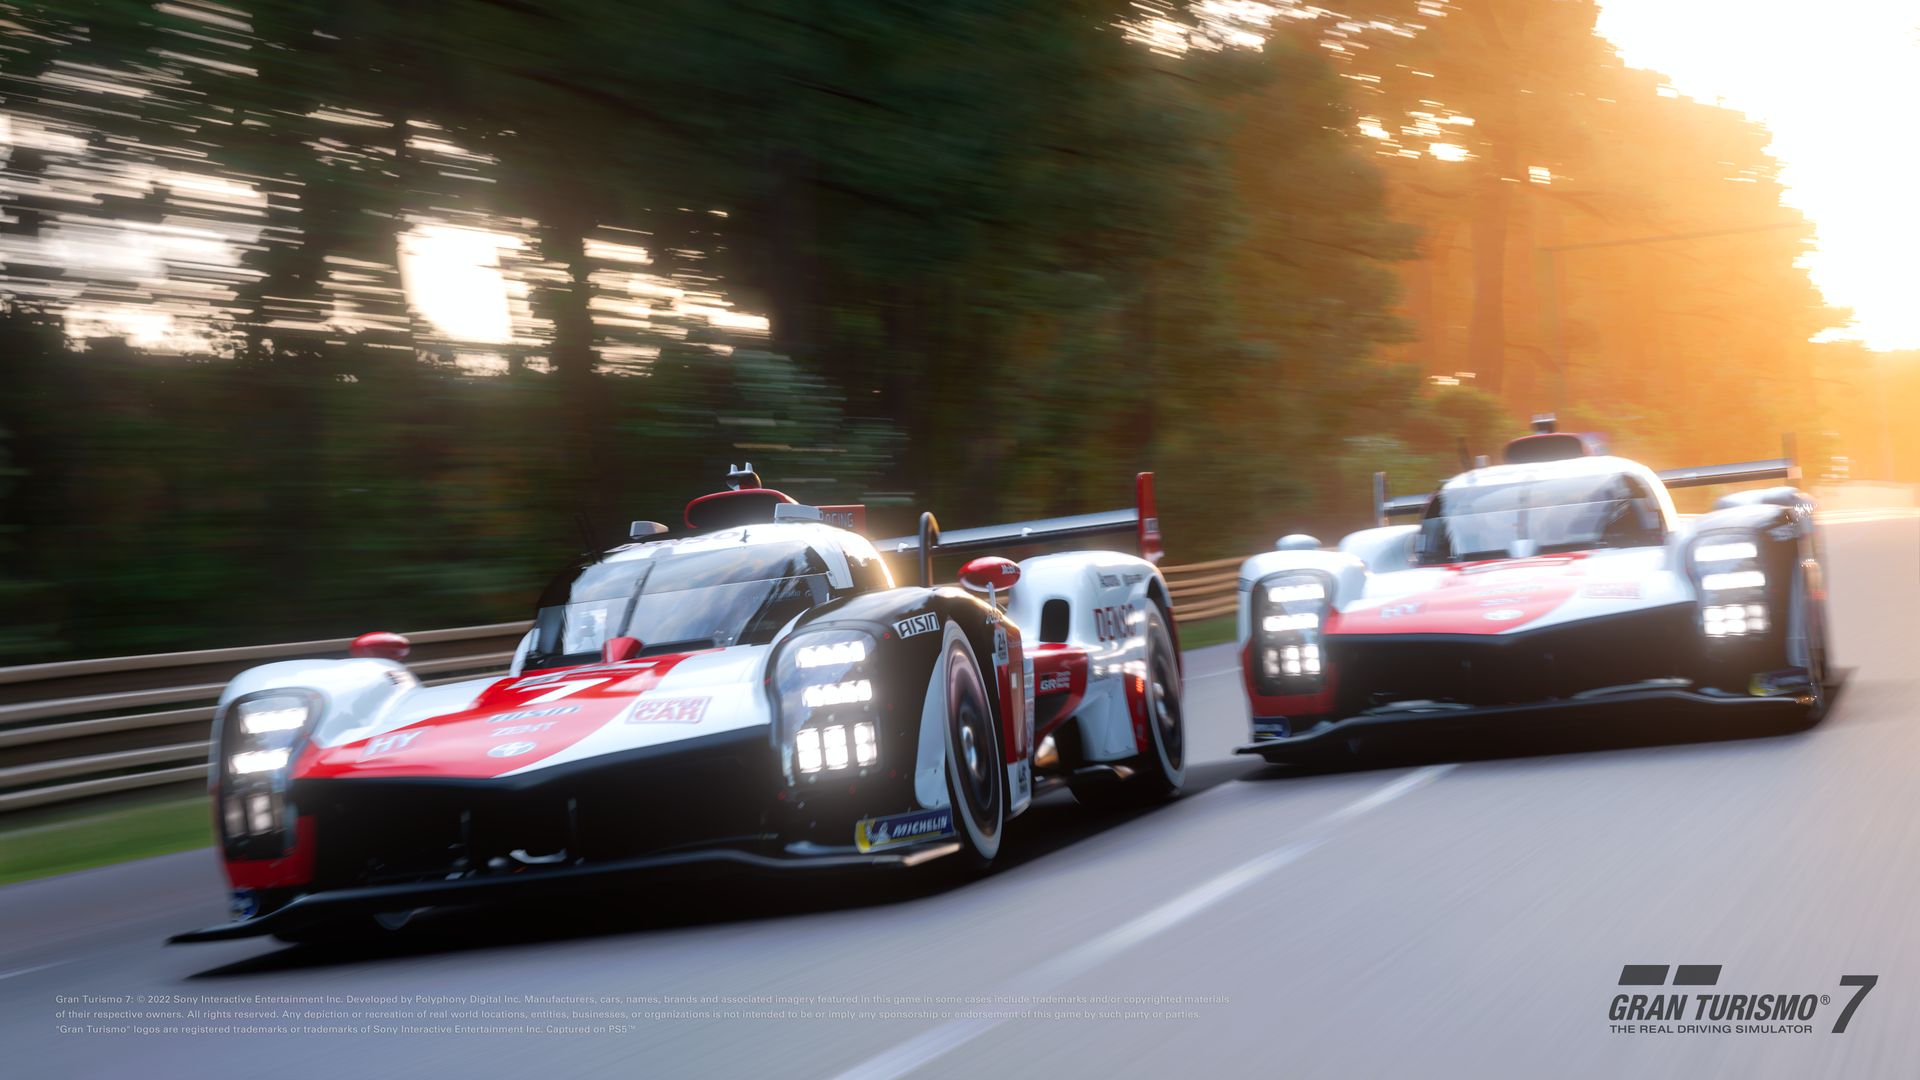 The Gran Turismo 7 May Update: Three New Cars and More Tuning Options! 